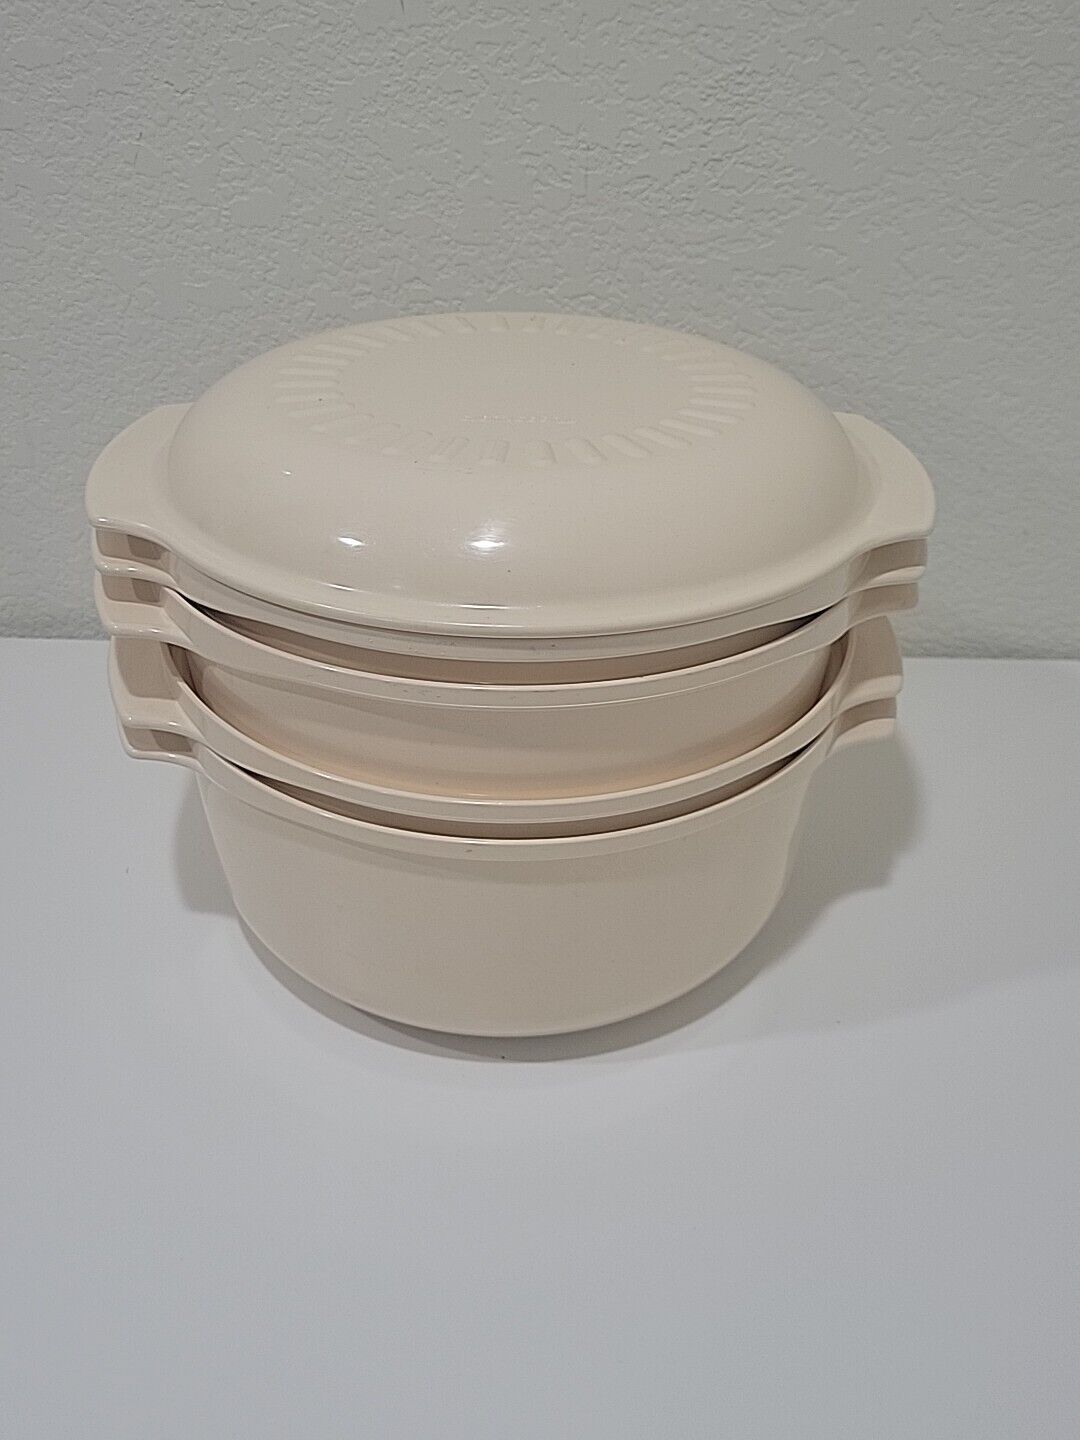 Tupperware Tupperwave Microwave Stack Cooker Steamer 5 Pc Almond 3 Qt 1.75 Qt 